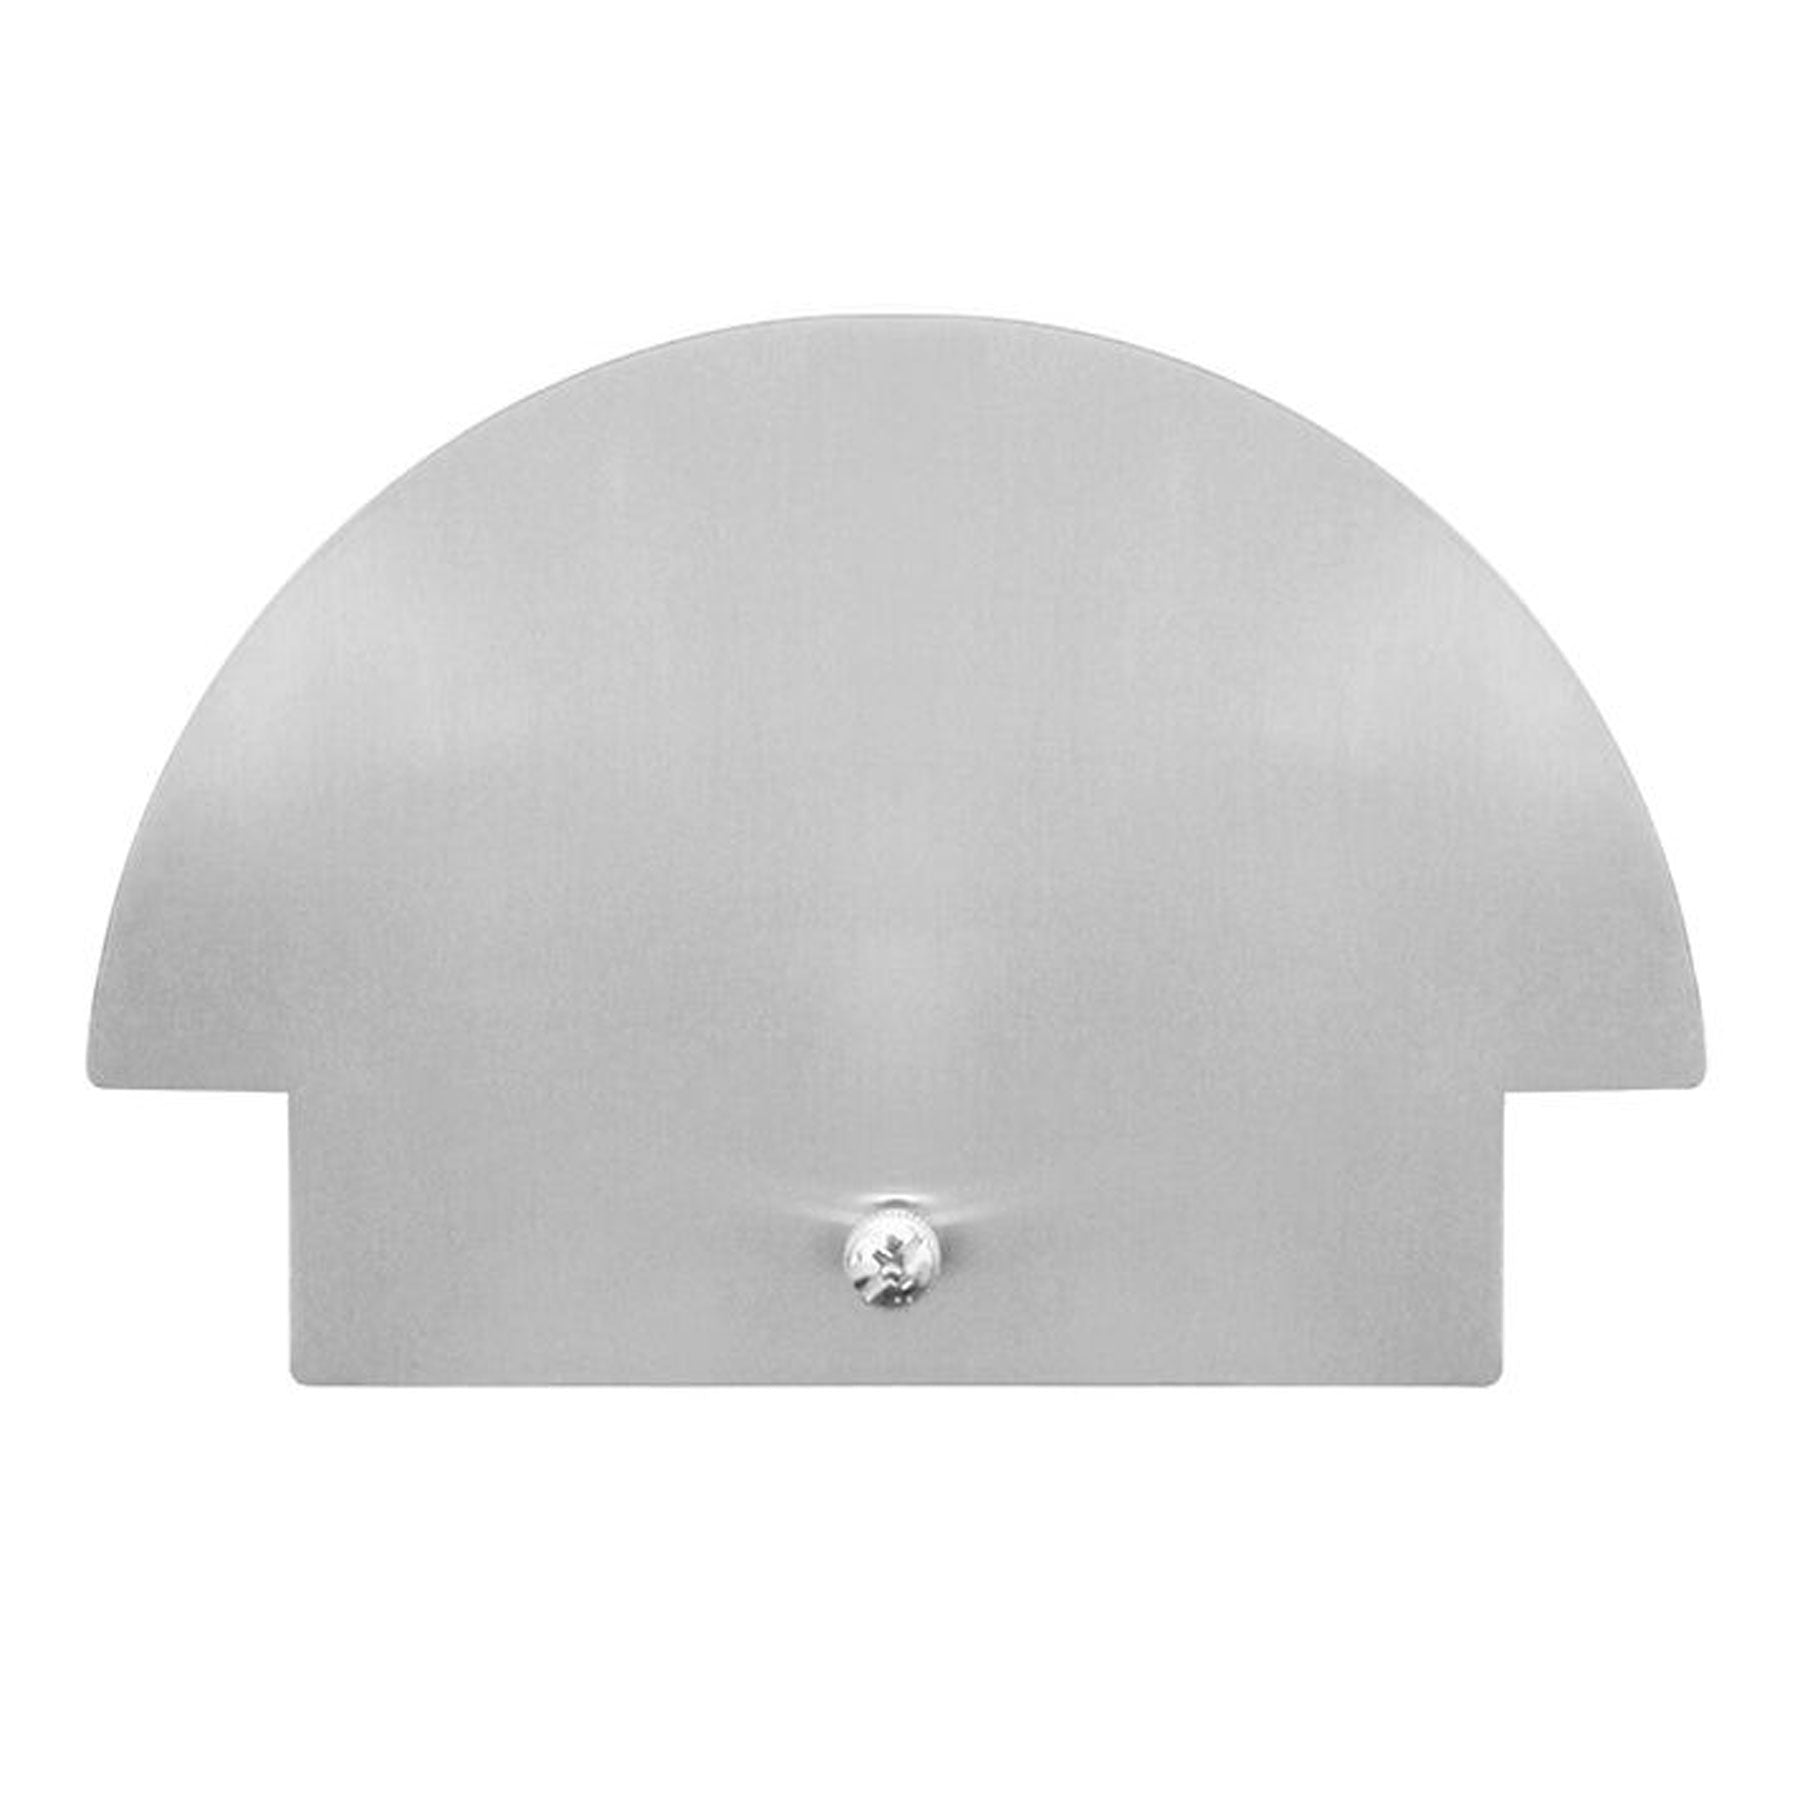 Contemporary Bath Vanity Frosted Integrated LED Lights, Nickel Trim